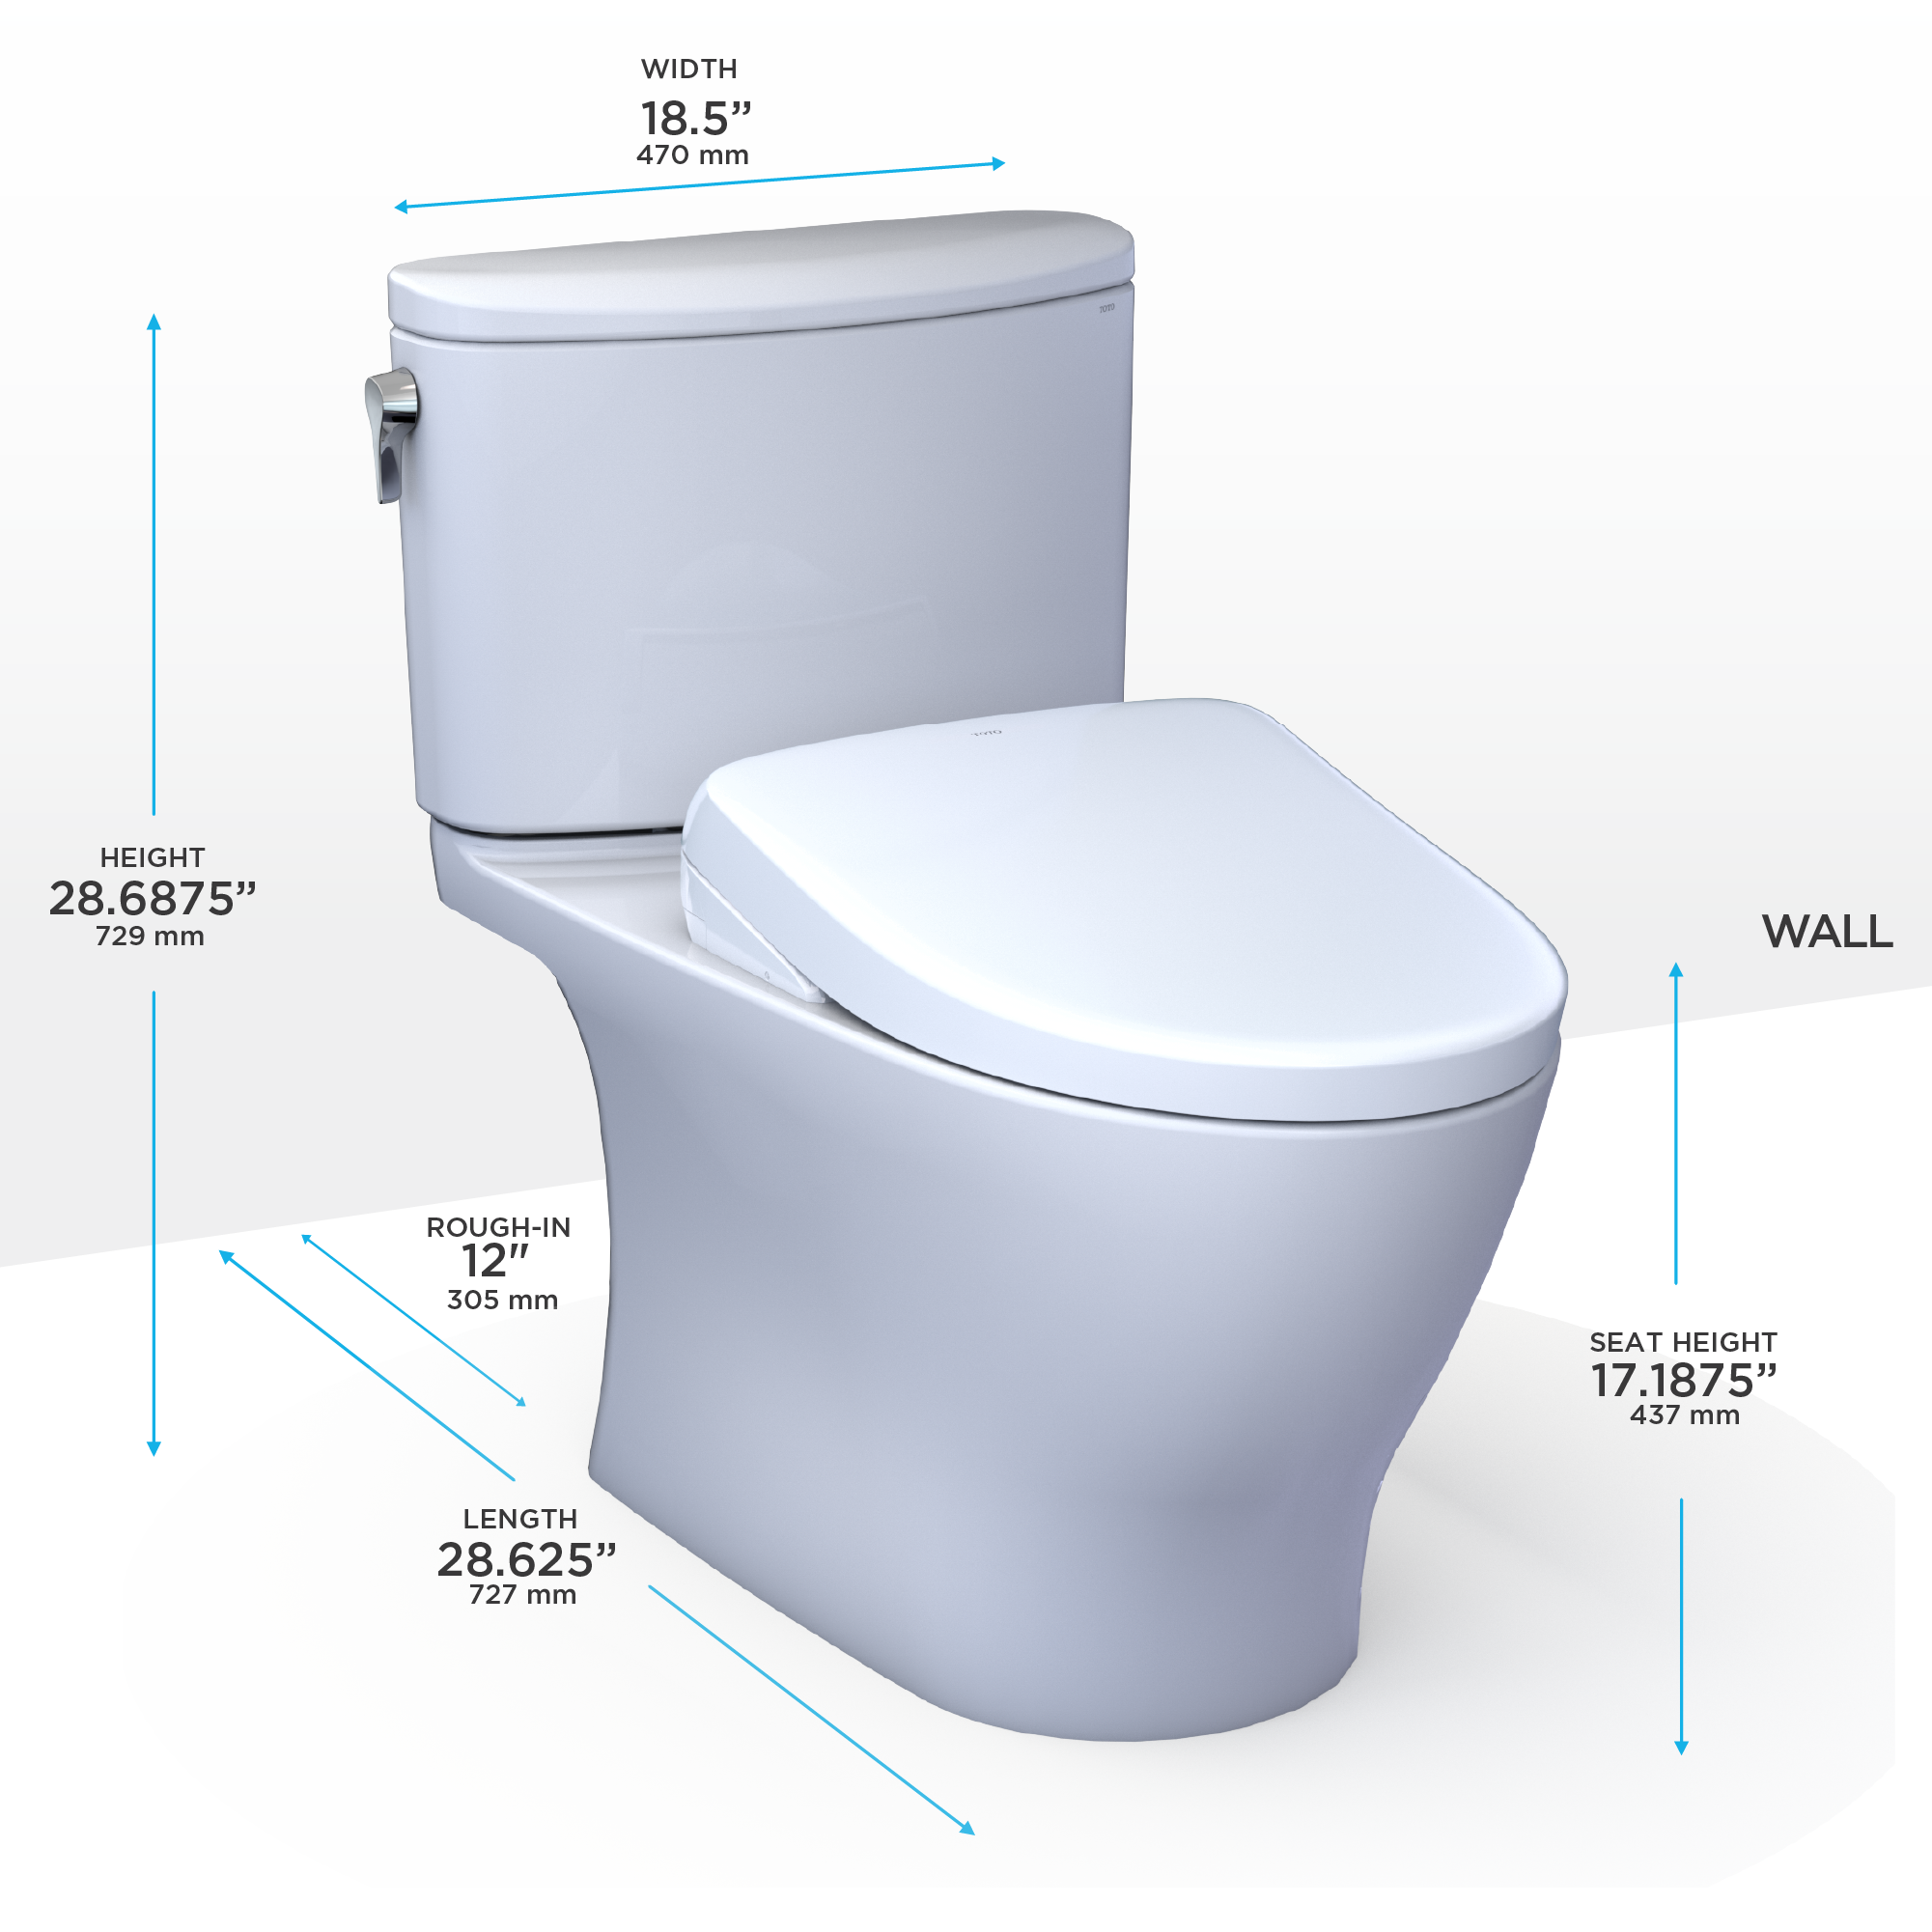 TOTO WASHLET+ Nexus 1G Two-Piece Elongated 1.0 GPF Toilet with S7A Contemporary Bidet Seat, Cotton White - MW4424736CUFG#01, MW4424736CUFGA#01